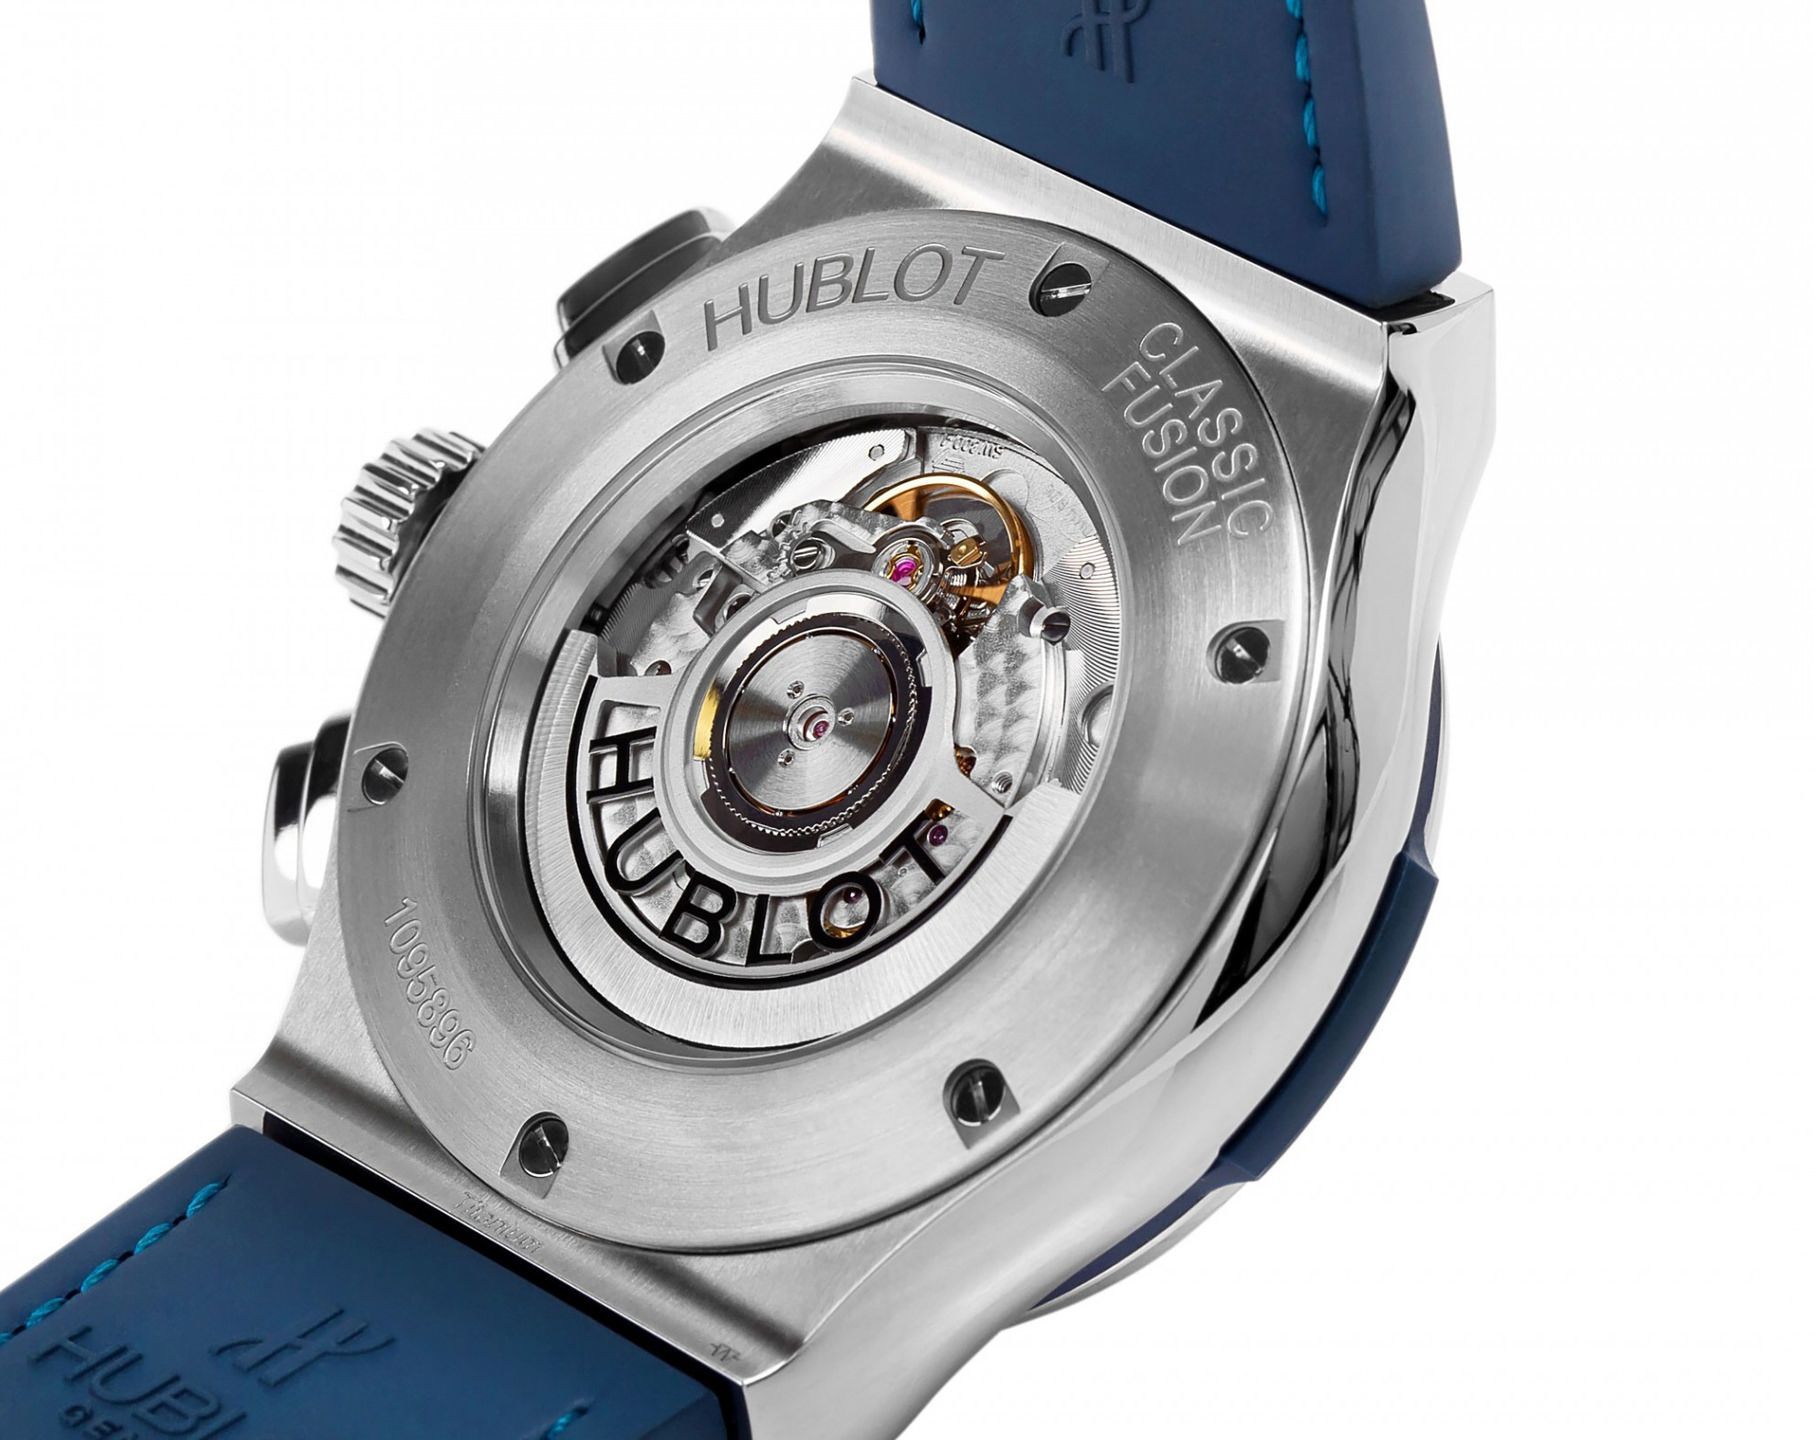 Hublot Chronograph 45 mm Watch in Blue Dial For Men - 2